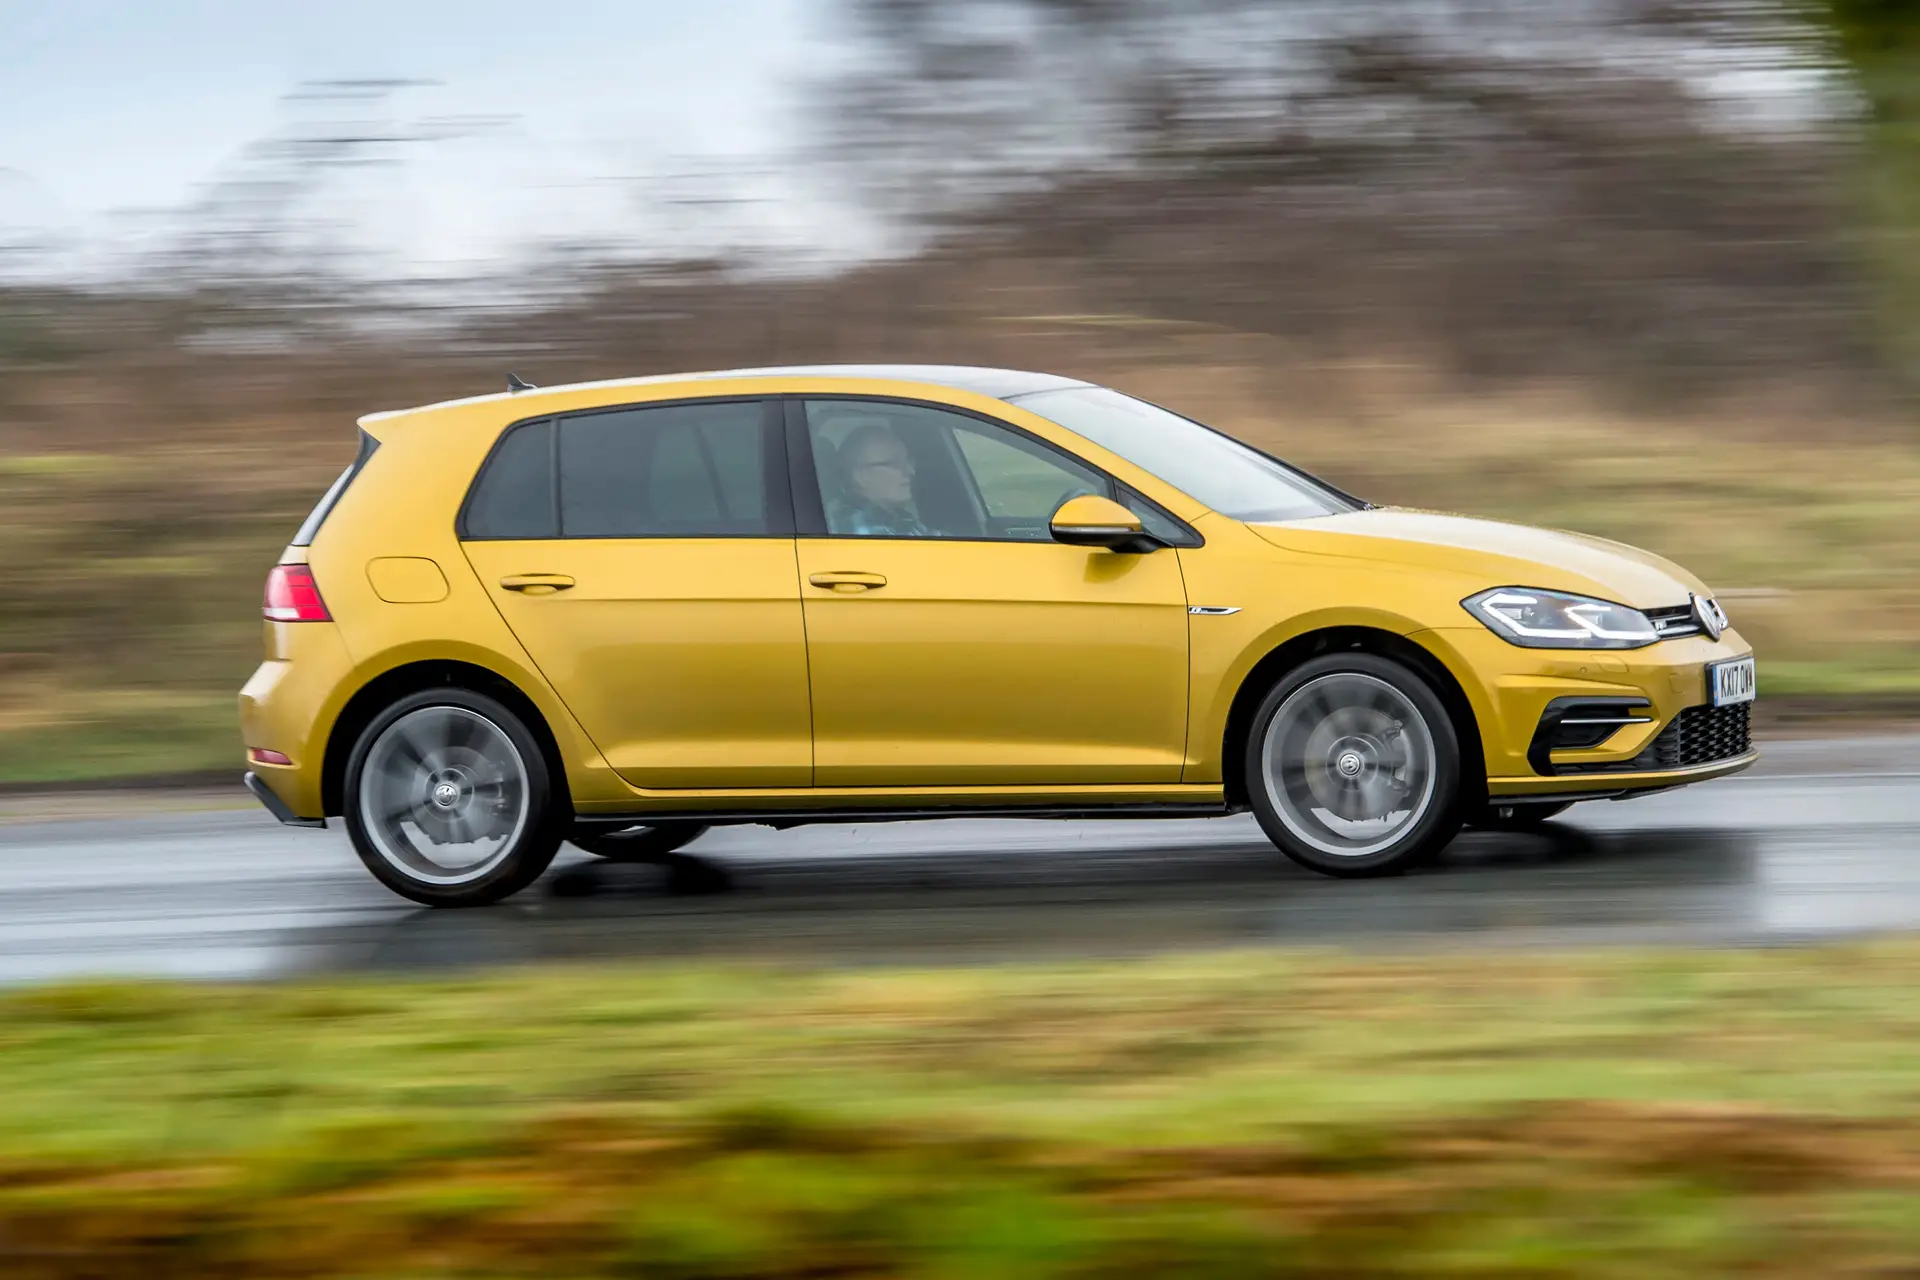 Volkswagen Golf (2013-202) Review: exterior side photo of the Volkswagen Golf on the road